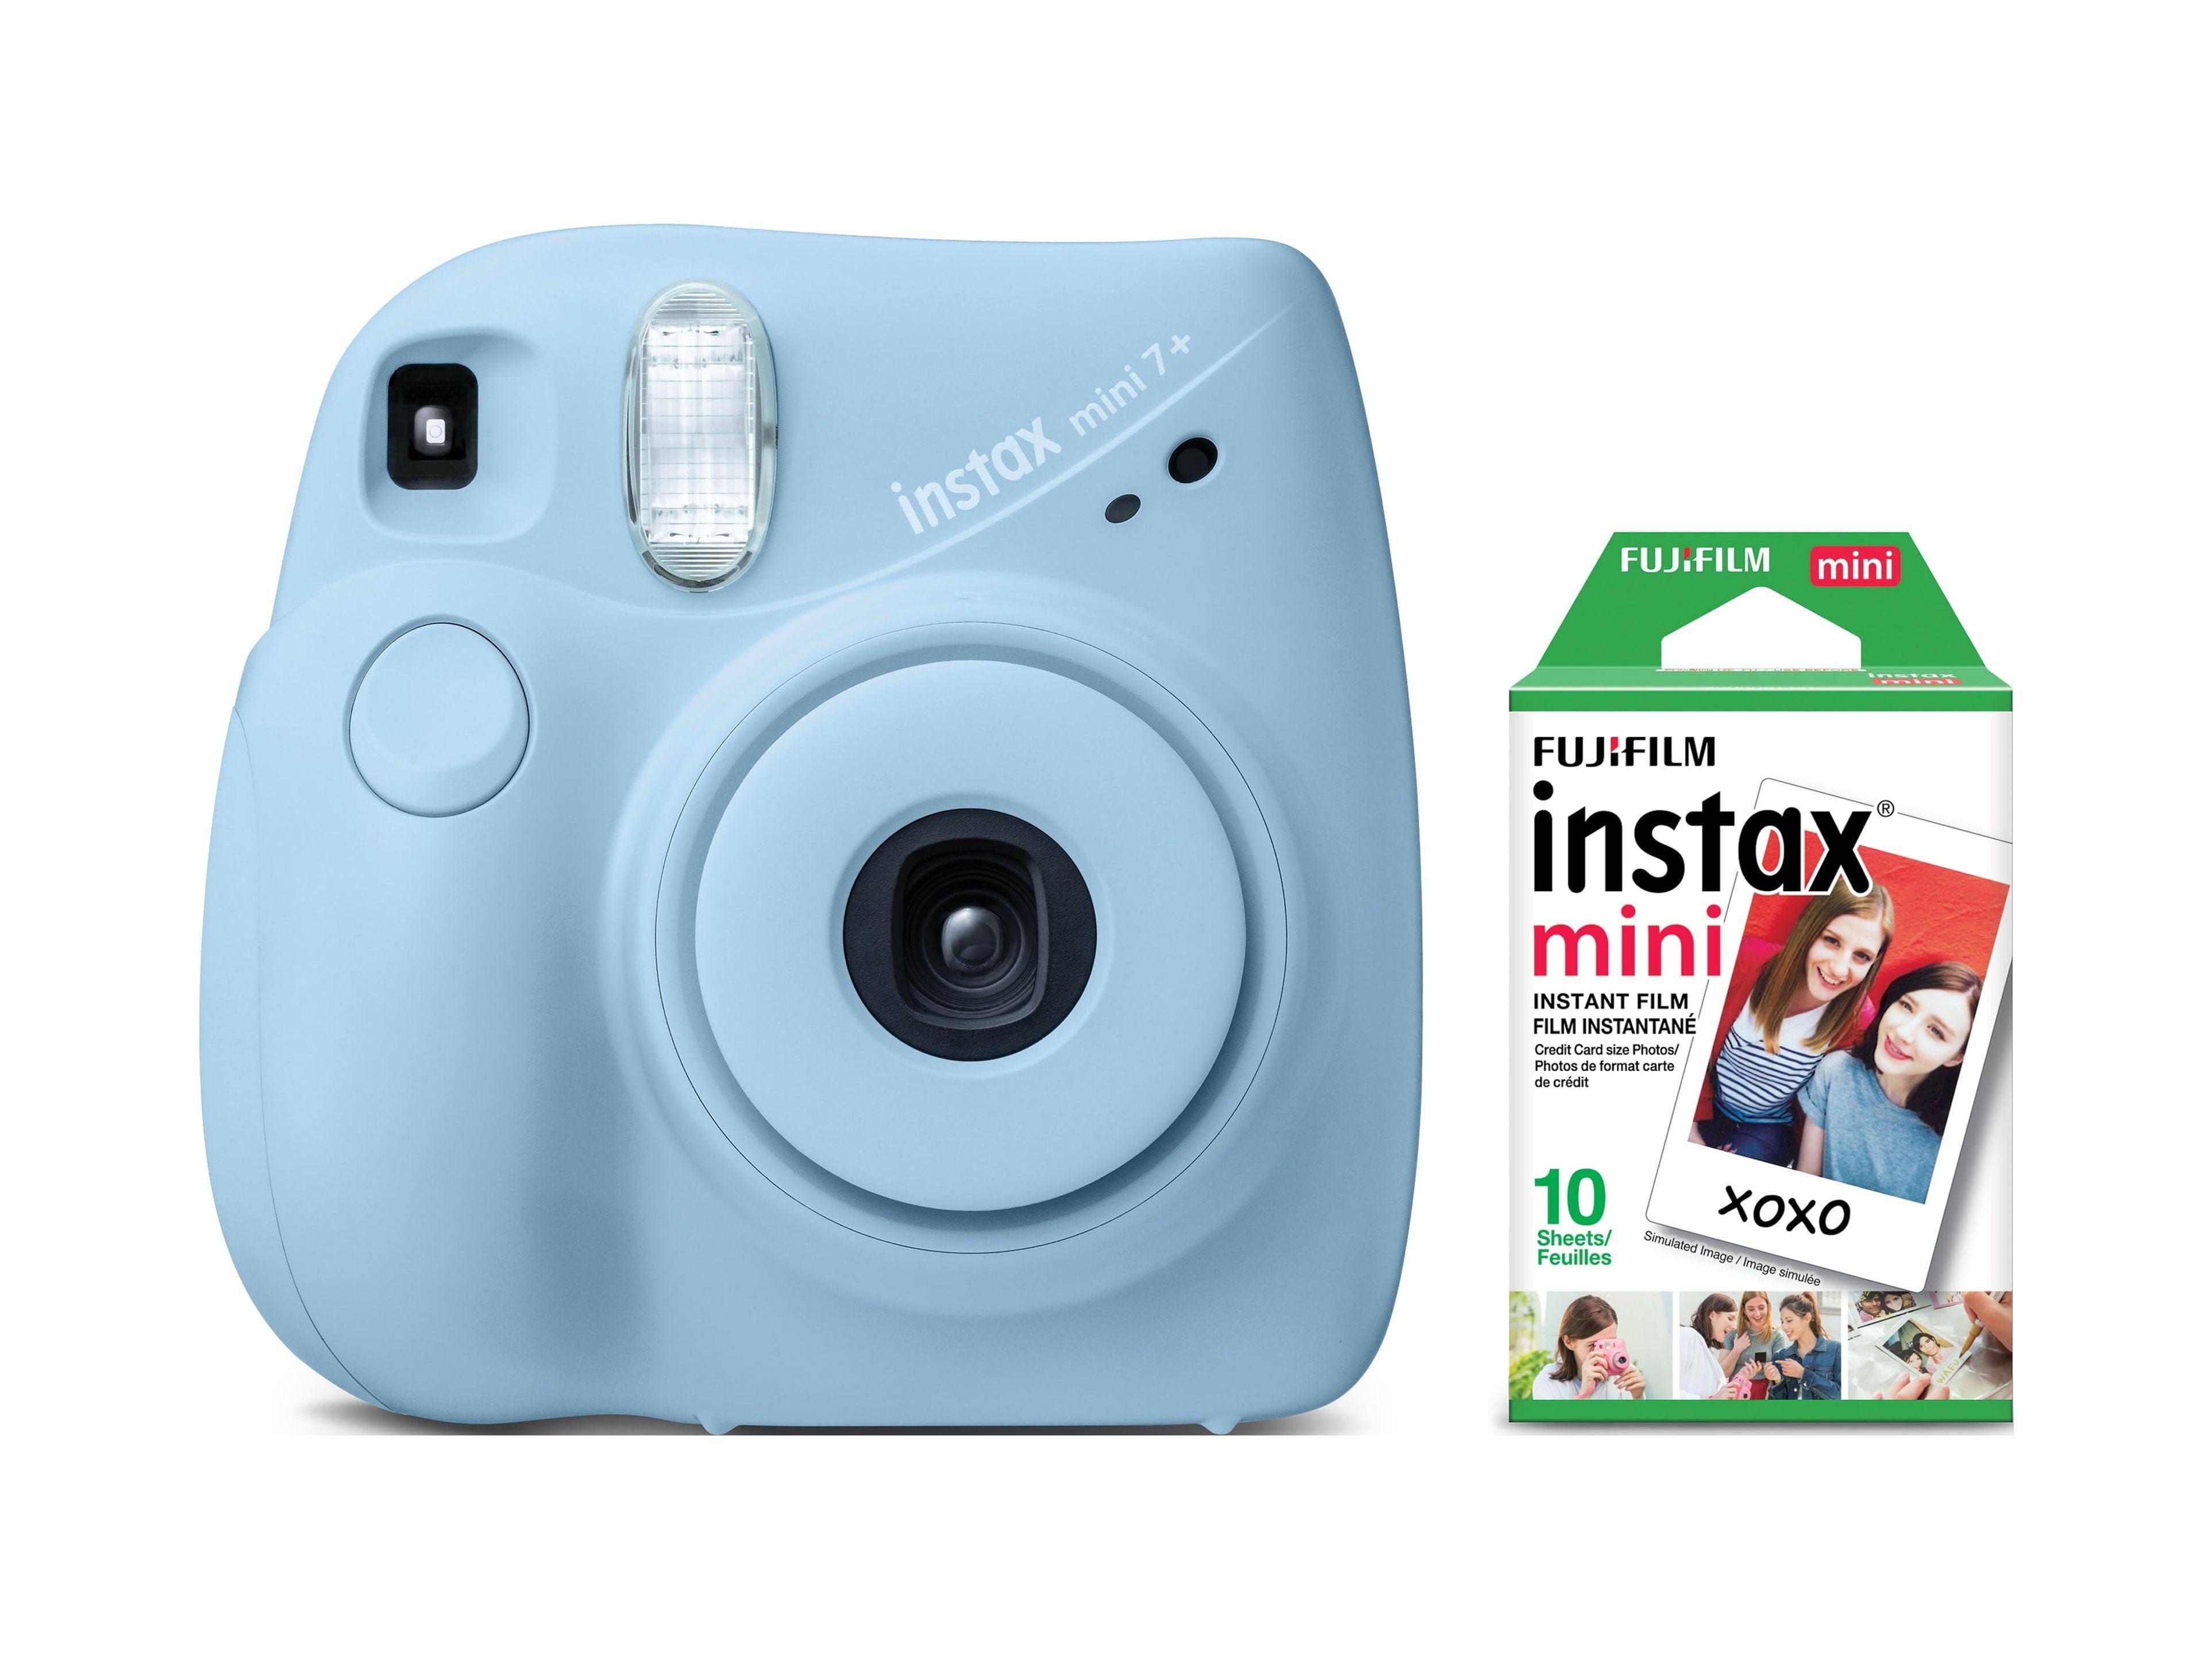 Fujifilm Instax Mini 7+ Film Camera - Light Blue: Easy and Fun Point-and-Shoot | Image